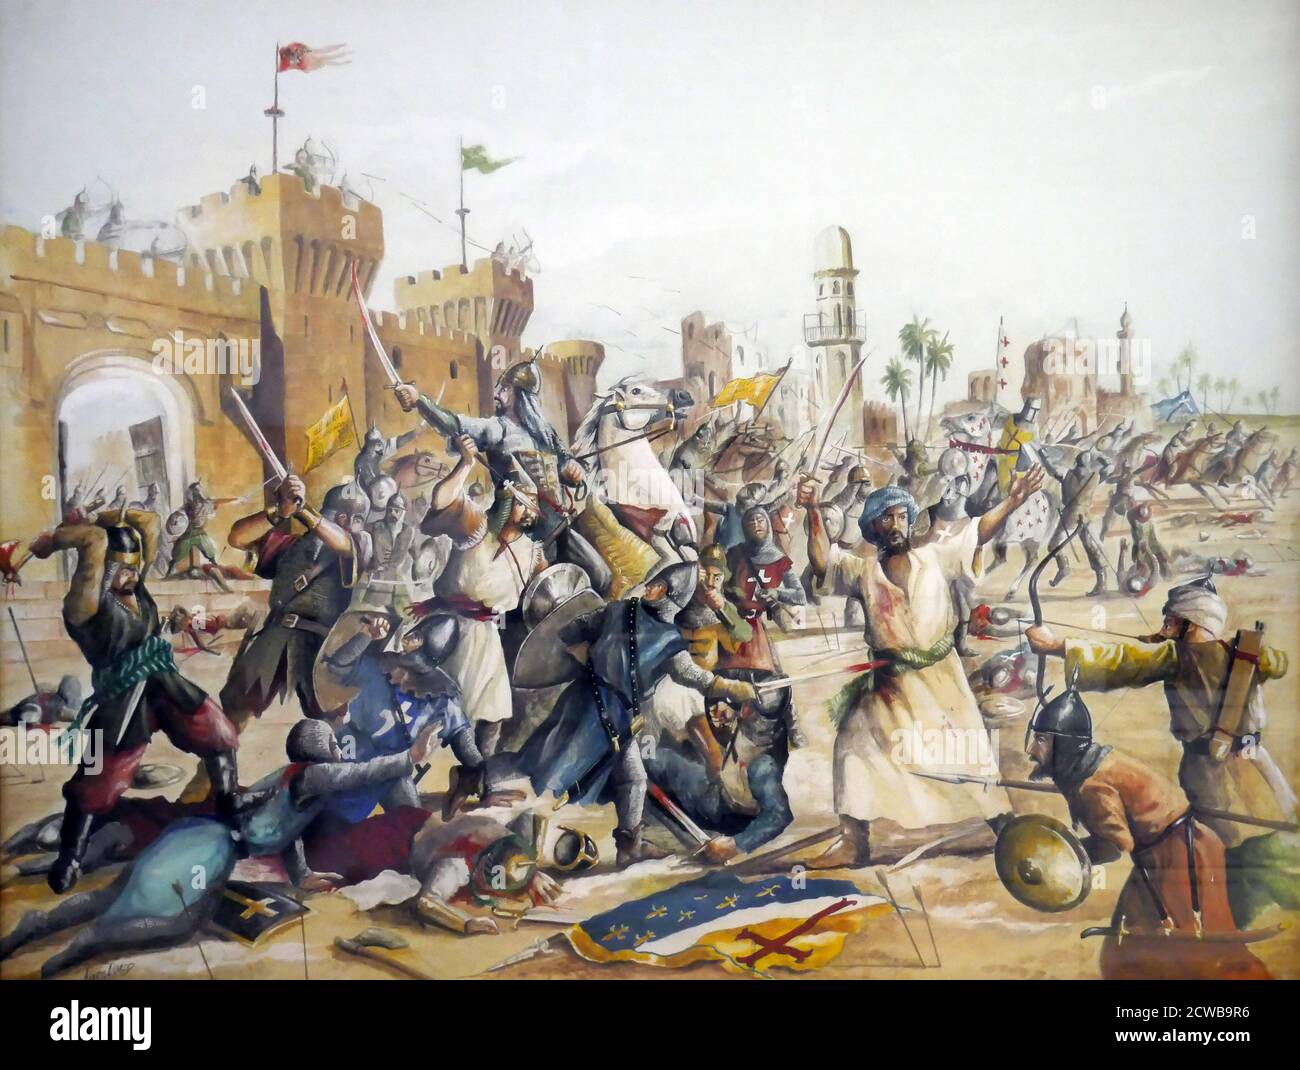 Contemporary Egyptian depiction of Crusades in the 12th century. The Crusader invasions of Egypt (1154-1169) were a series of campaigns undertaken by the Kingdom of Jerusalem to strengthen its position in the Levant by taking advantage of the weakness of Fatimid Egypt. Stock Photo